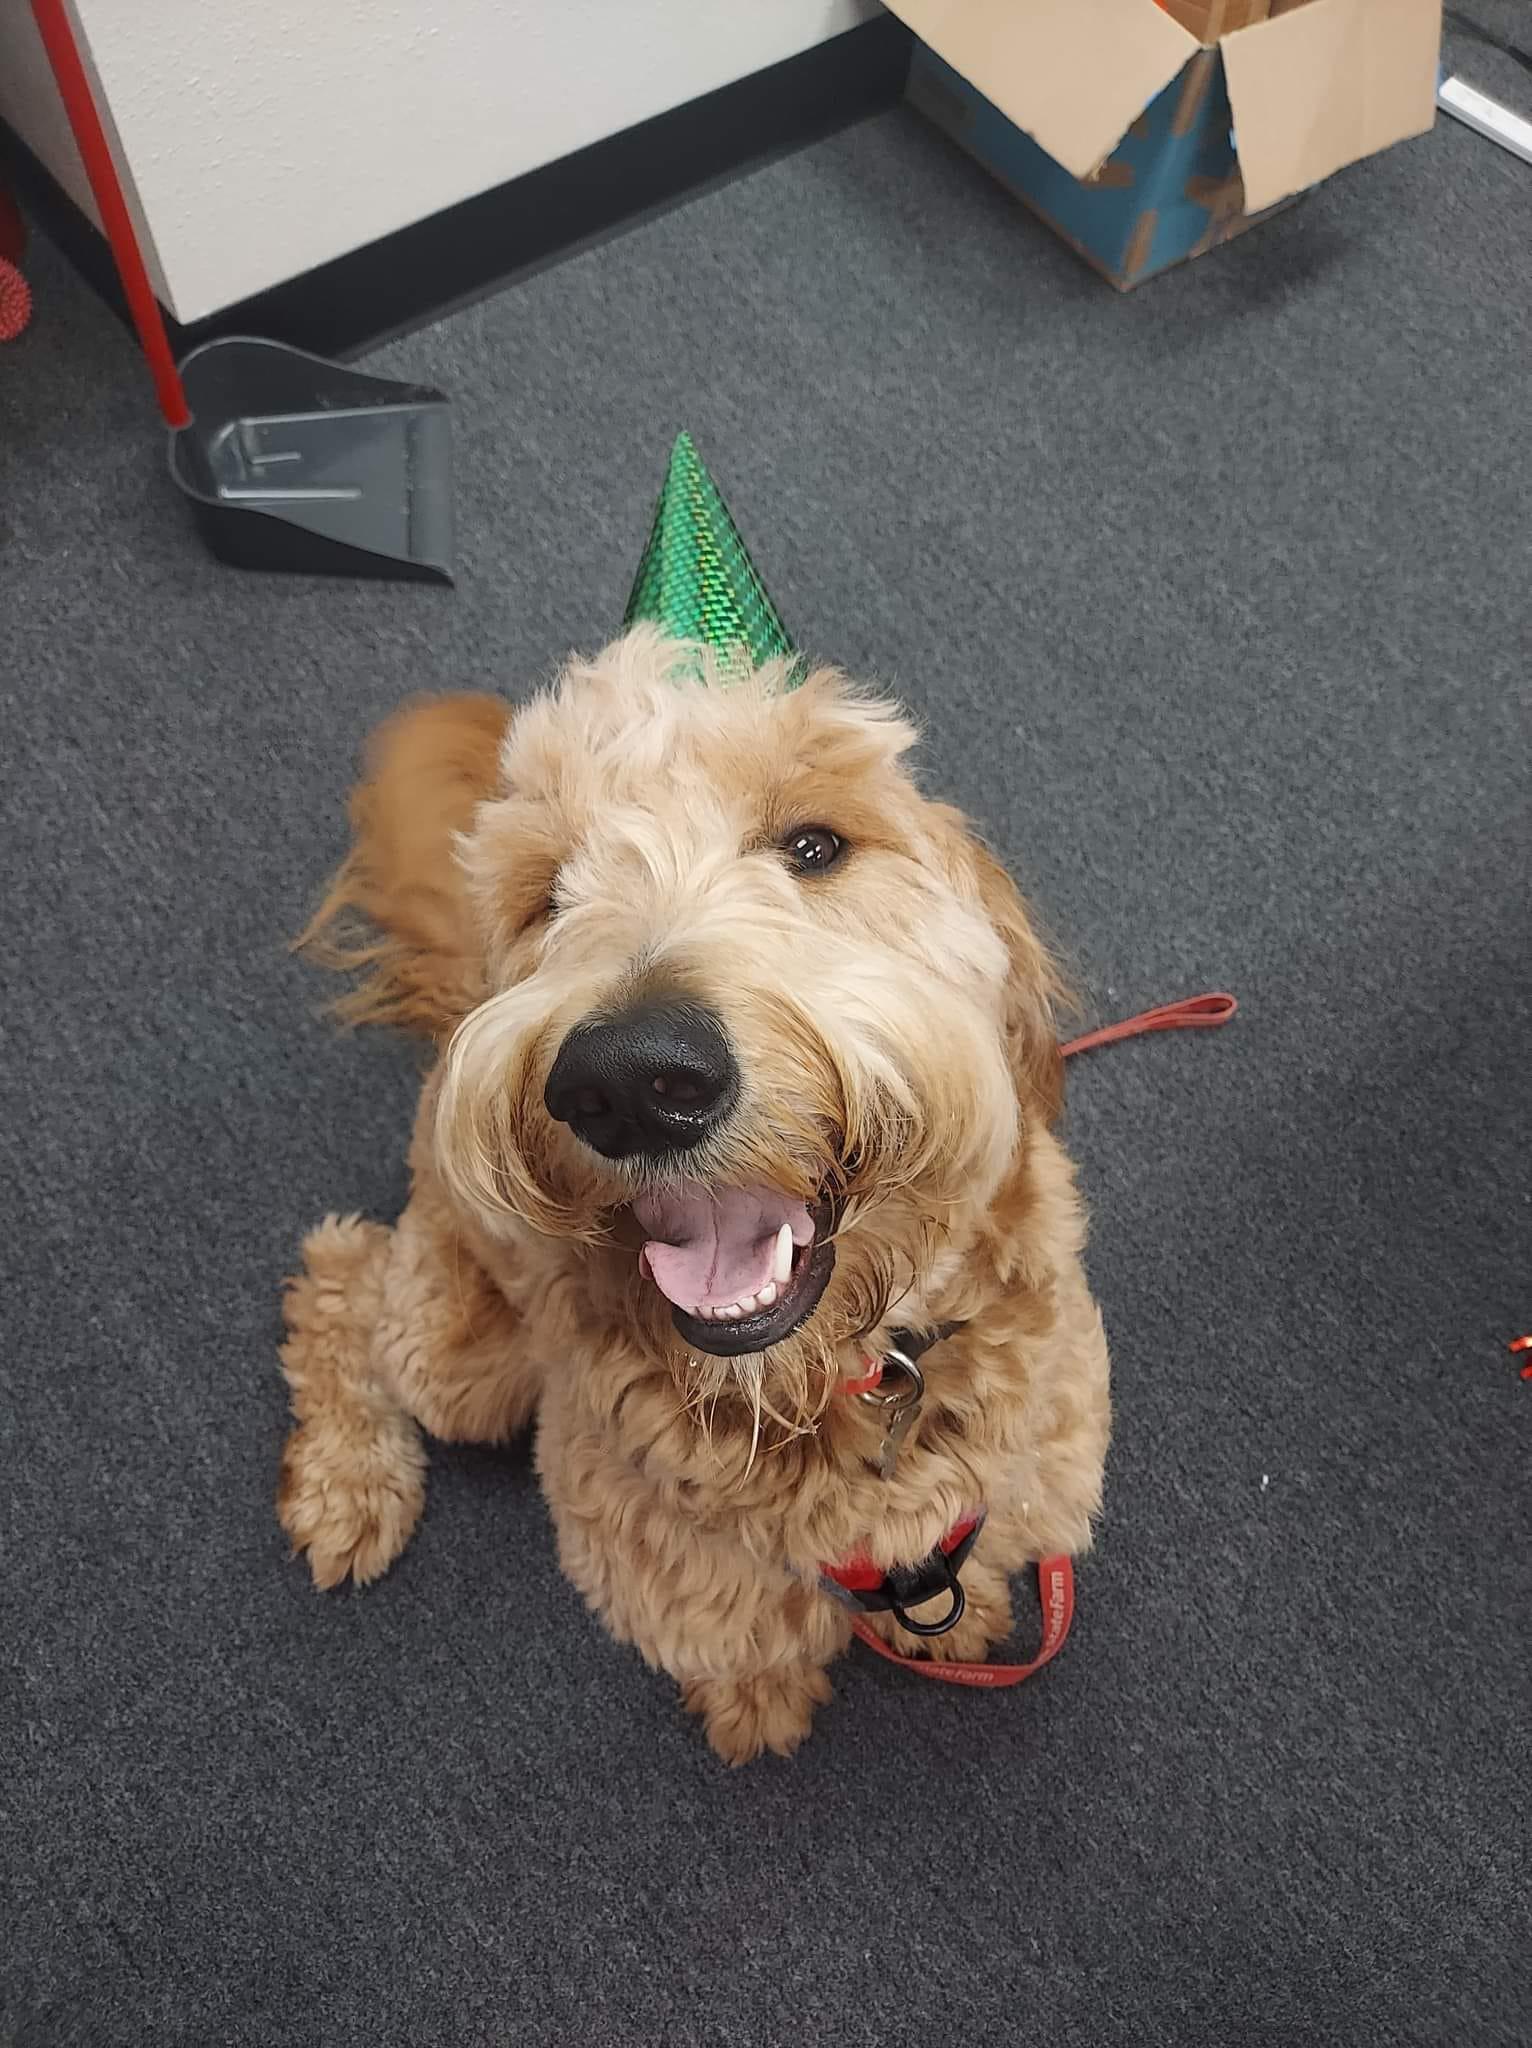 Bear the doodle hanging out for his bday at David Steinman state farm insurance agent's office